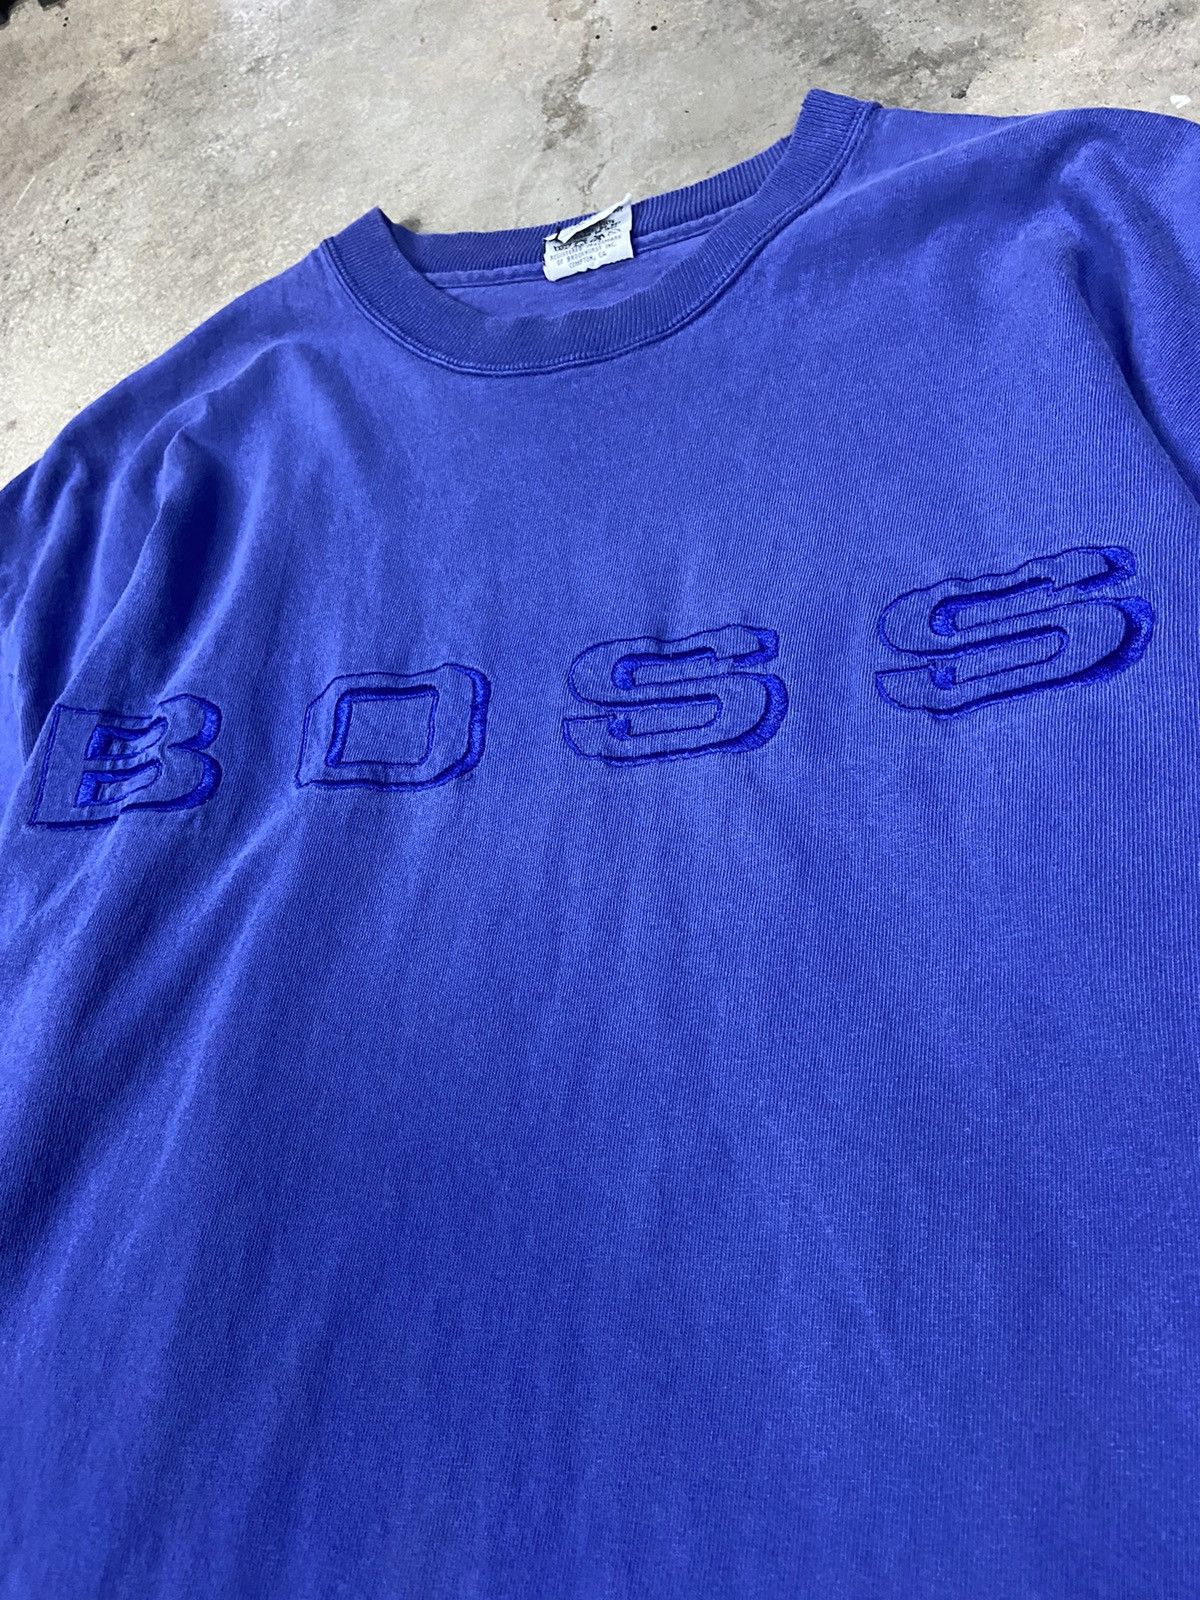 Vintage Vintage boss embroidered lightly faded script t shirt Size US XL / EU 56 / 4 - 2 Preview